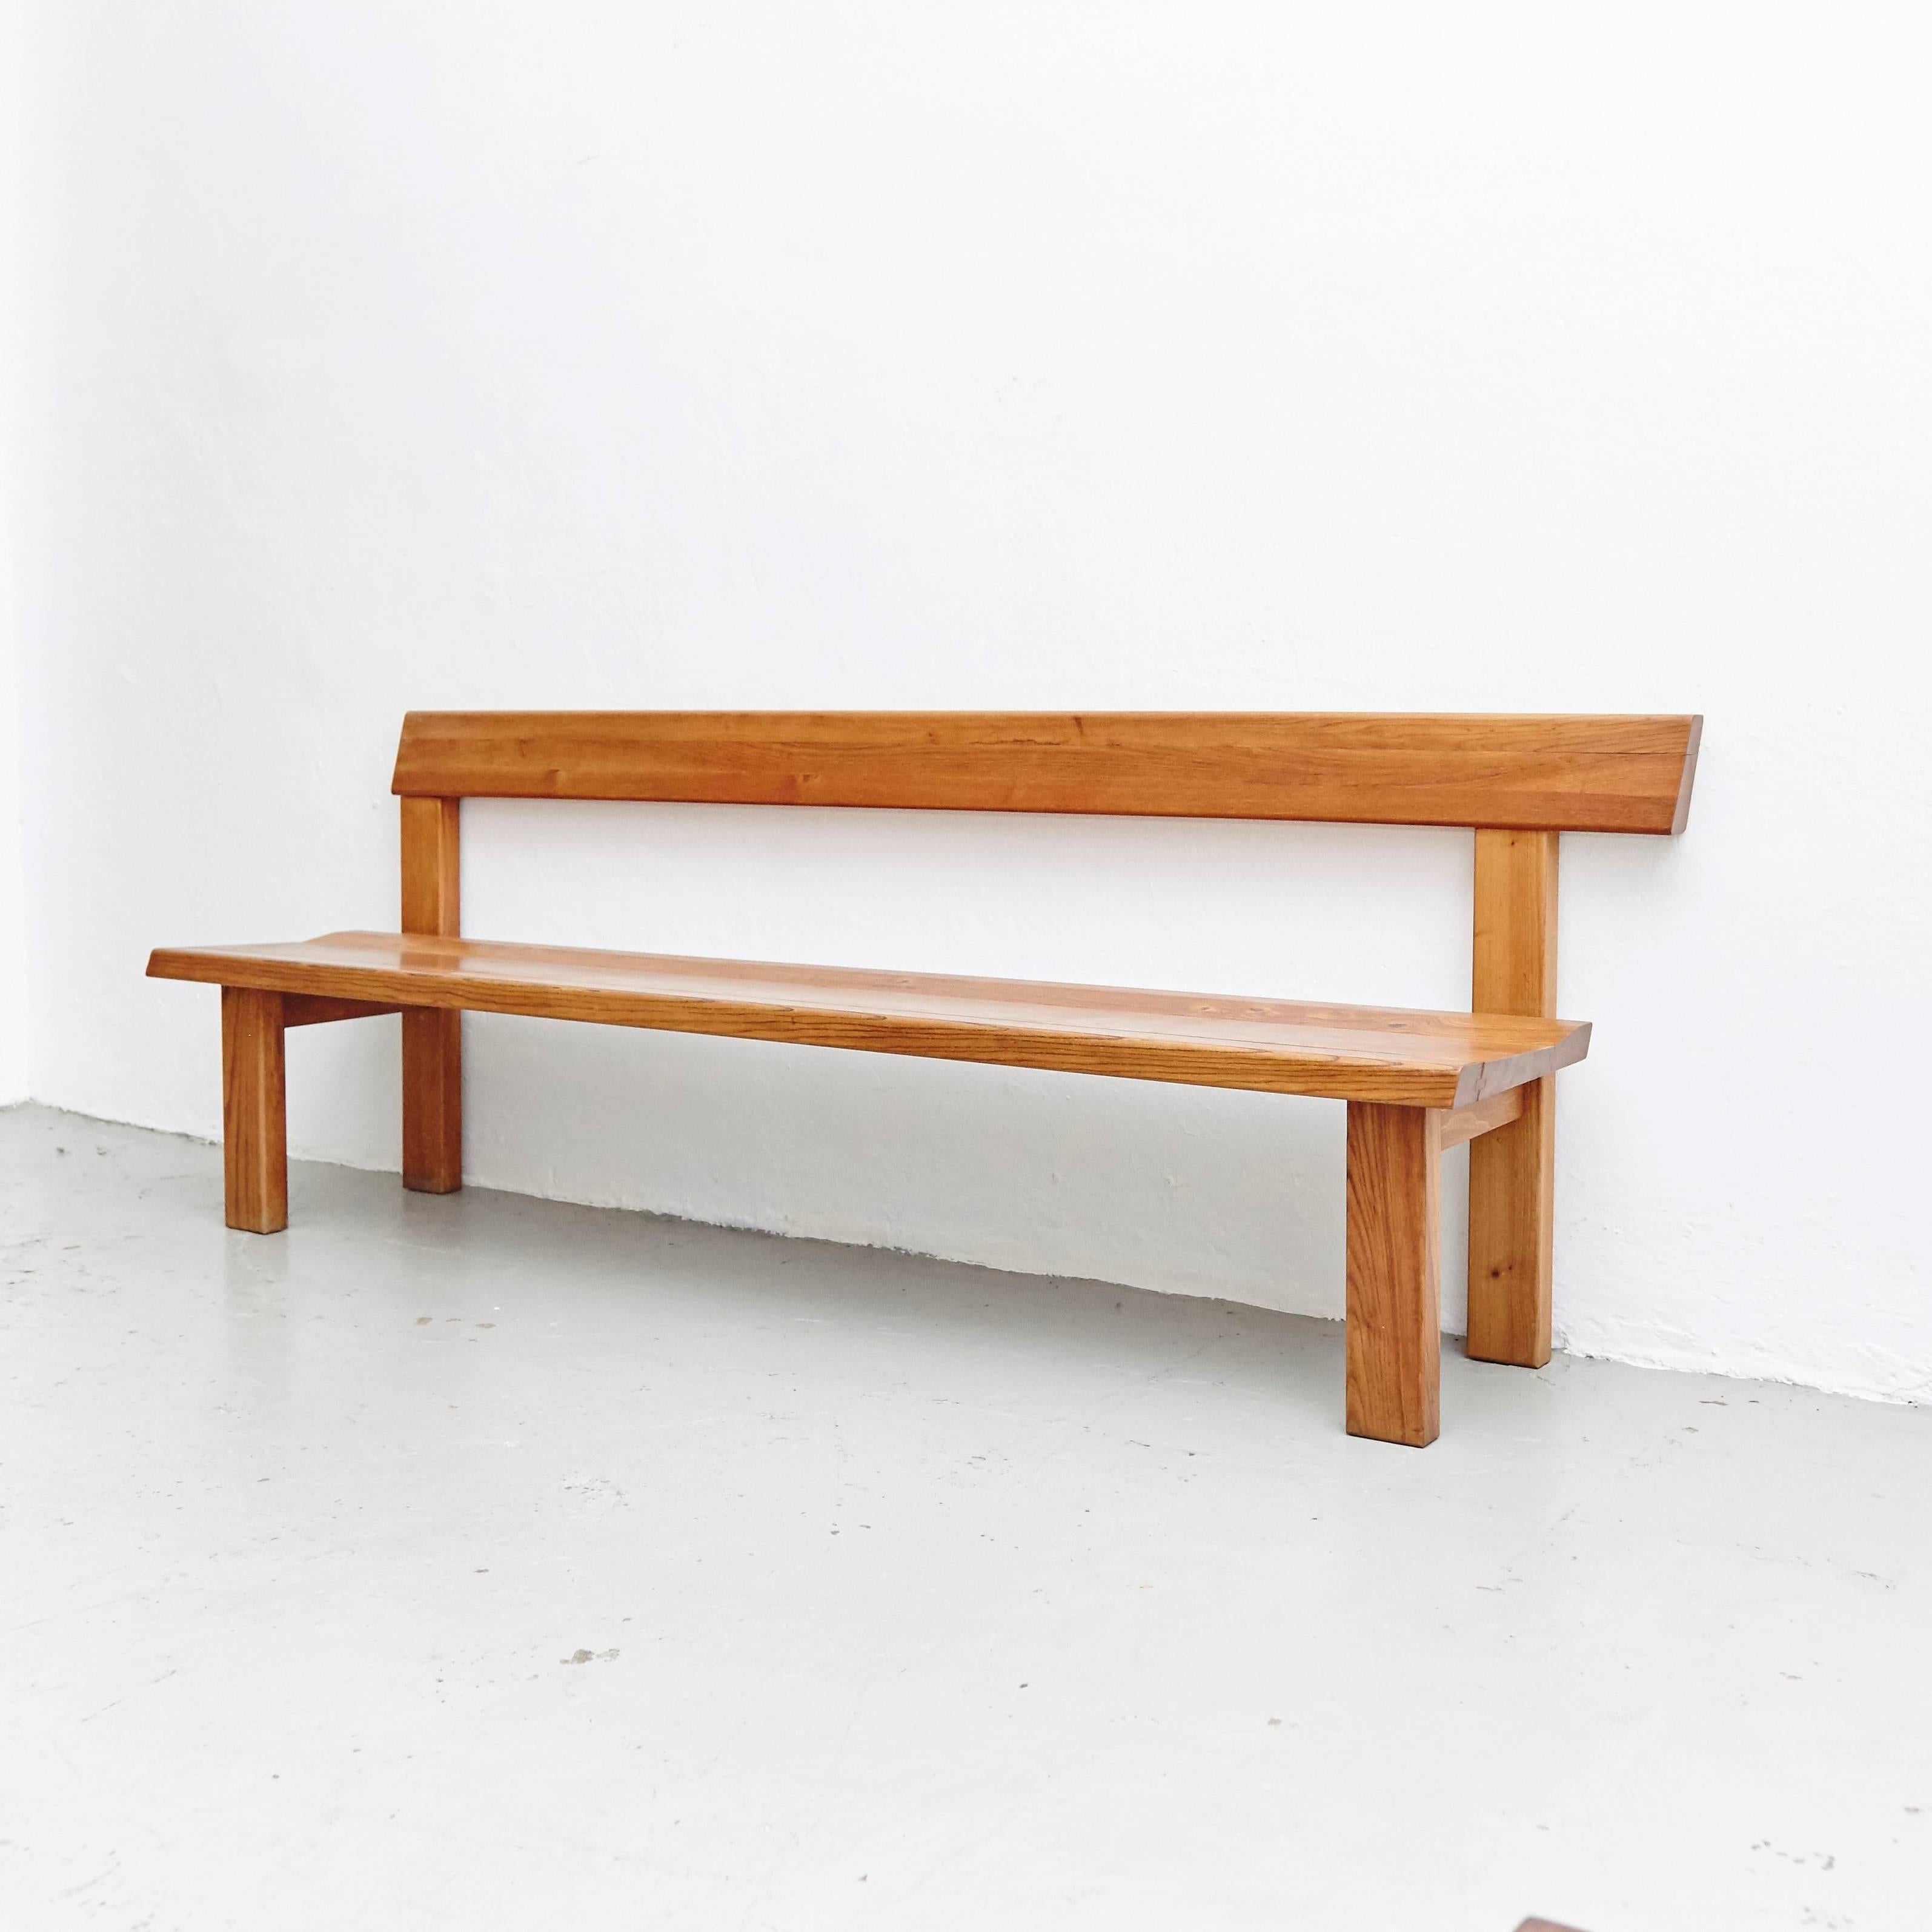 Large Bench designed by Pierre Chapo, manufactured in France, 1960s.

Solid elmwood.

In good original condition, with minor wear consistent with age and use, preserving a beautiful patina.

Pierre Chapo is born in a family of craftsmen. After